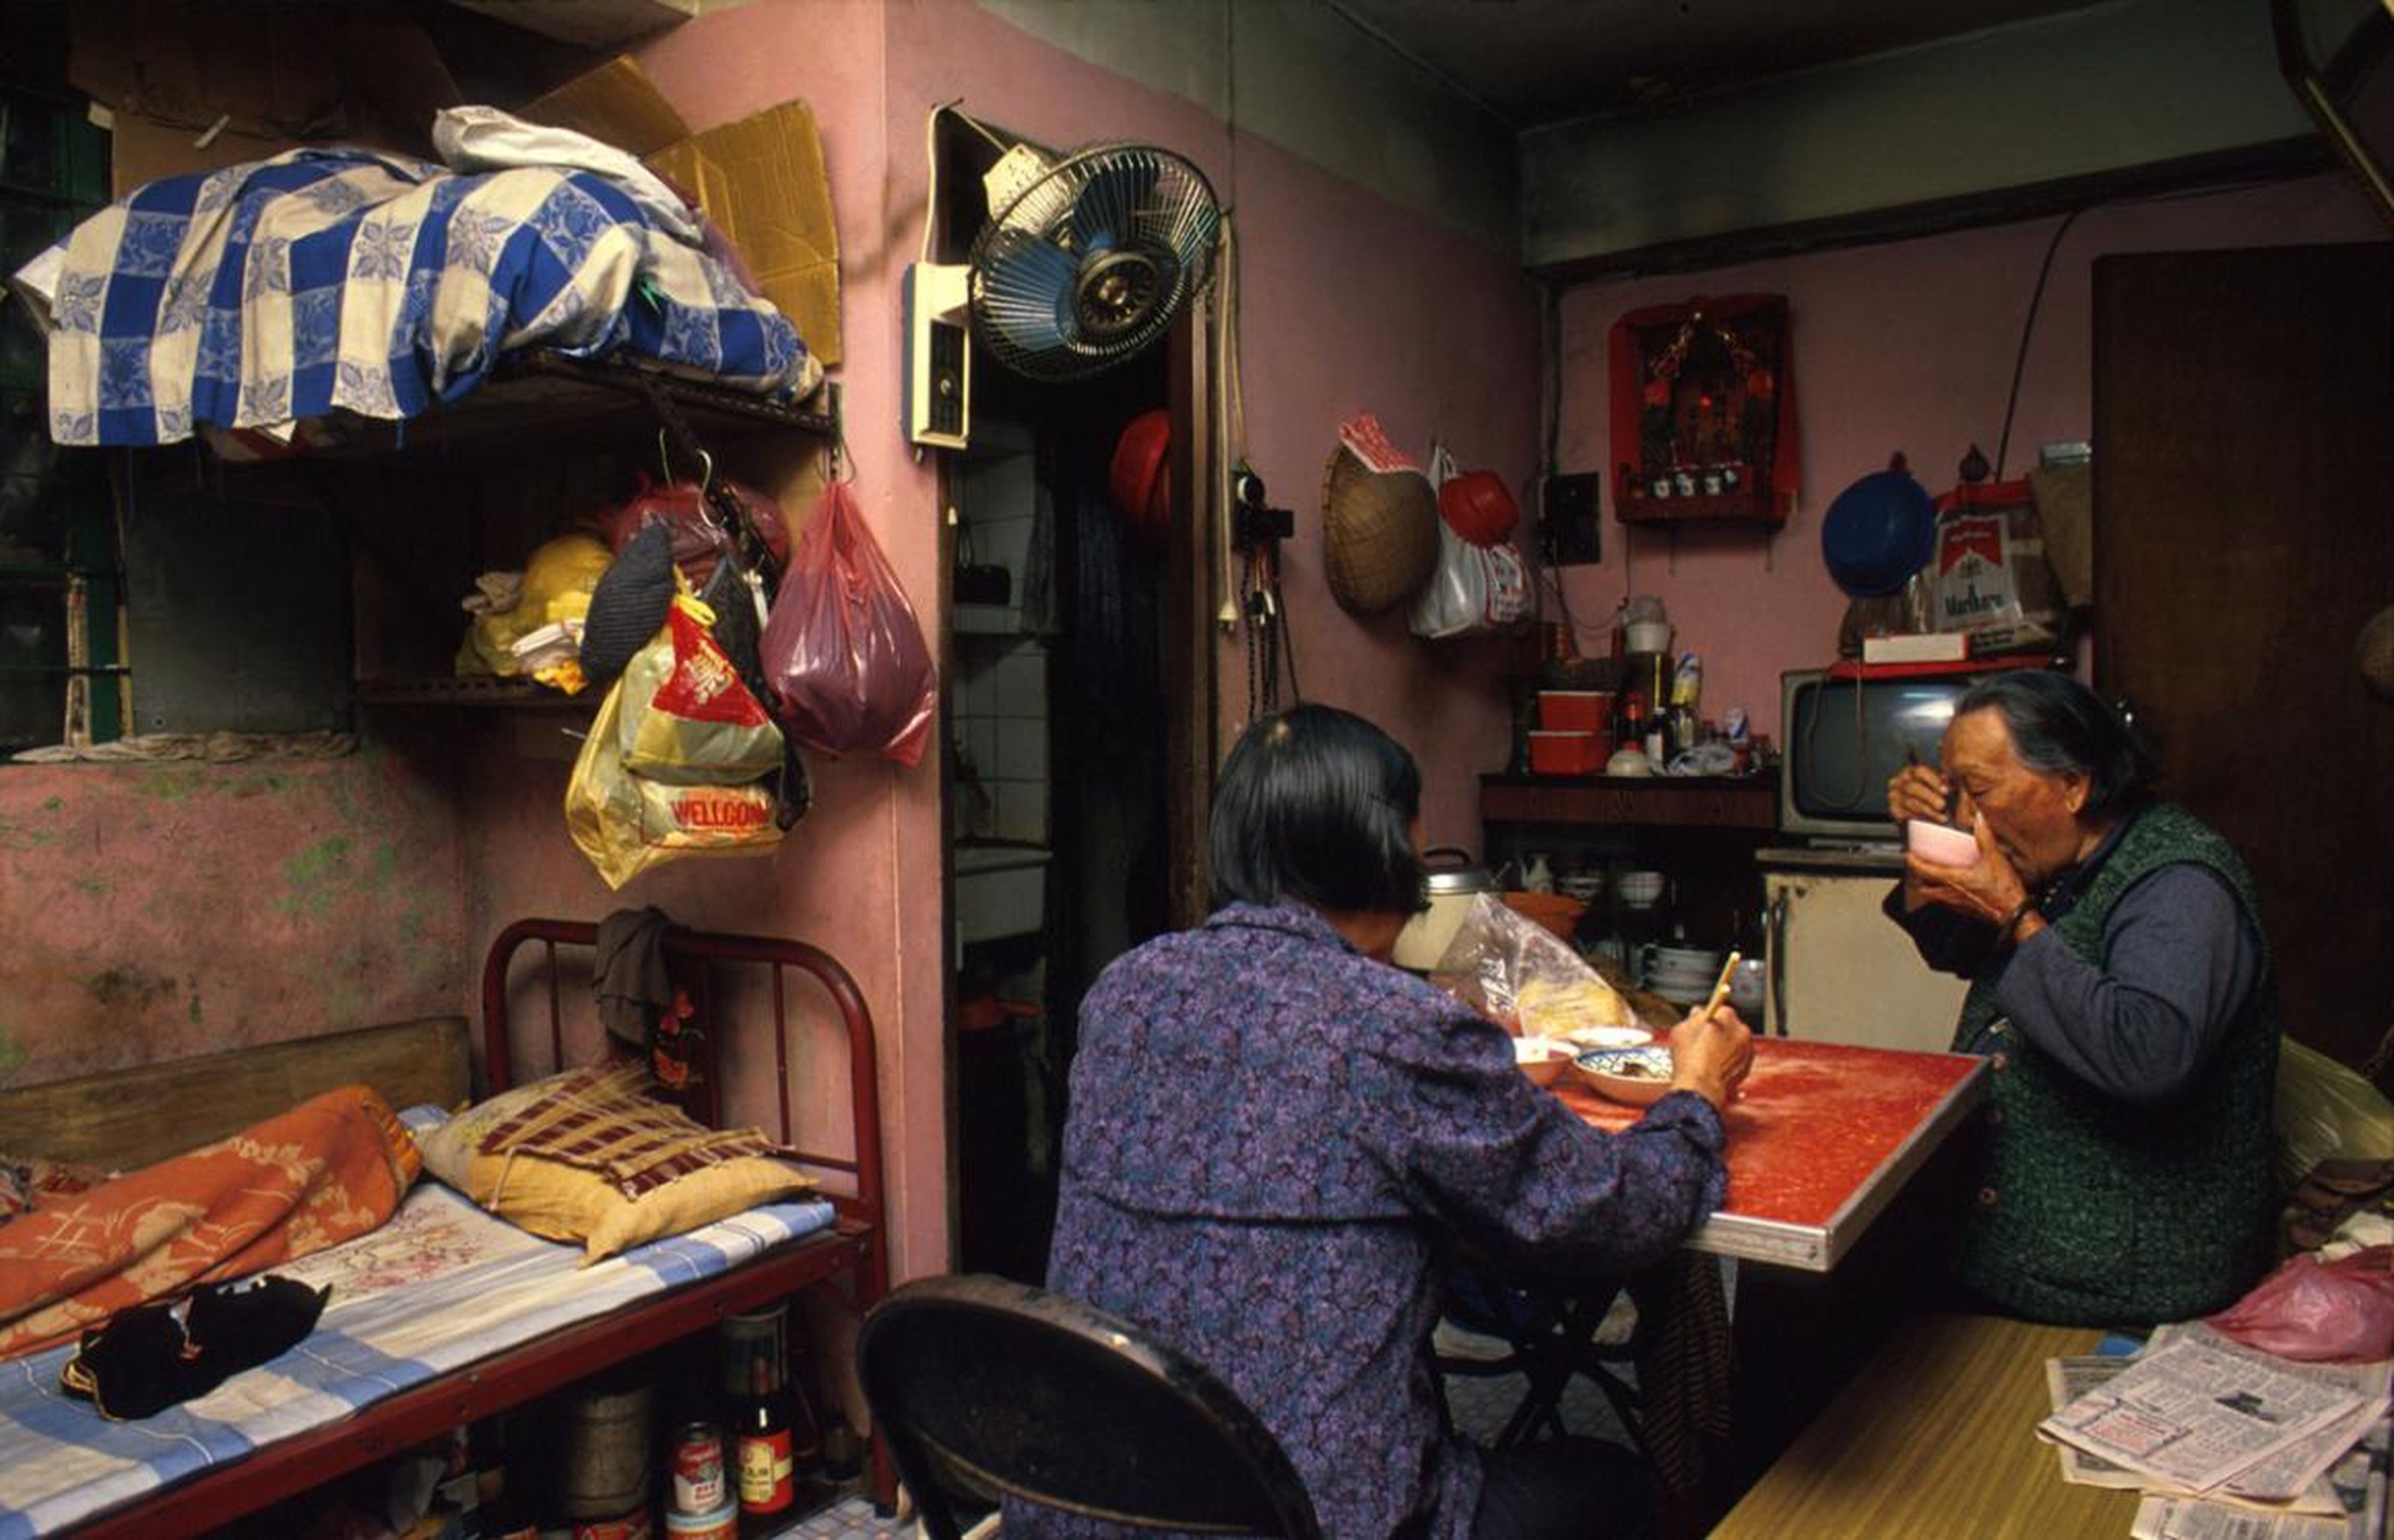 According to Girard, the Walled City had a village culture because of the tight living and working quarters. 90-year-old Law Yu Yi lived with her son's wife in a cramped third-floor apartment. It is typical for women to look after